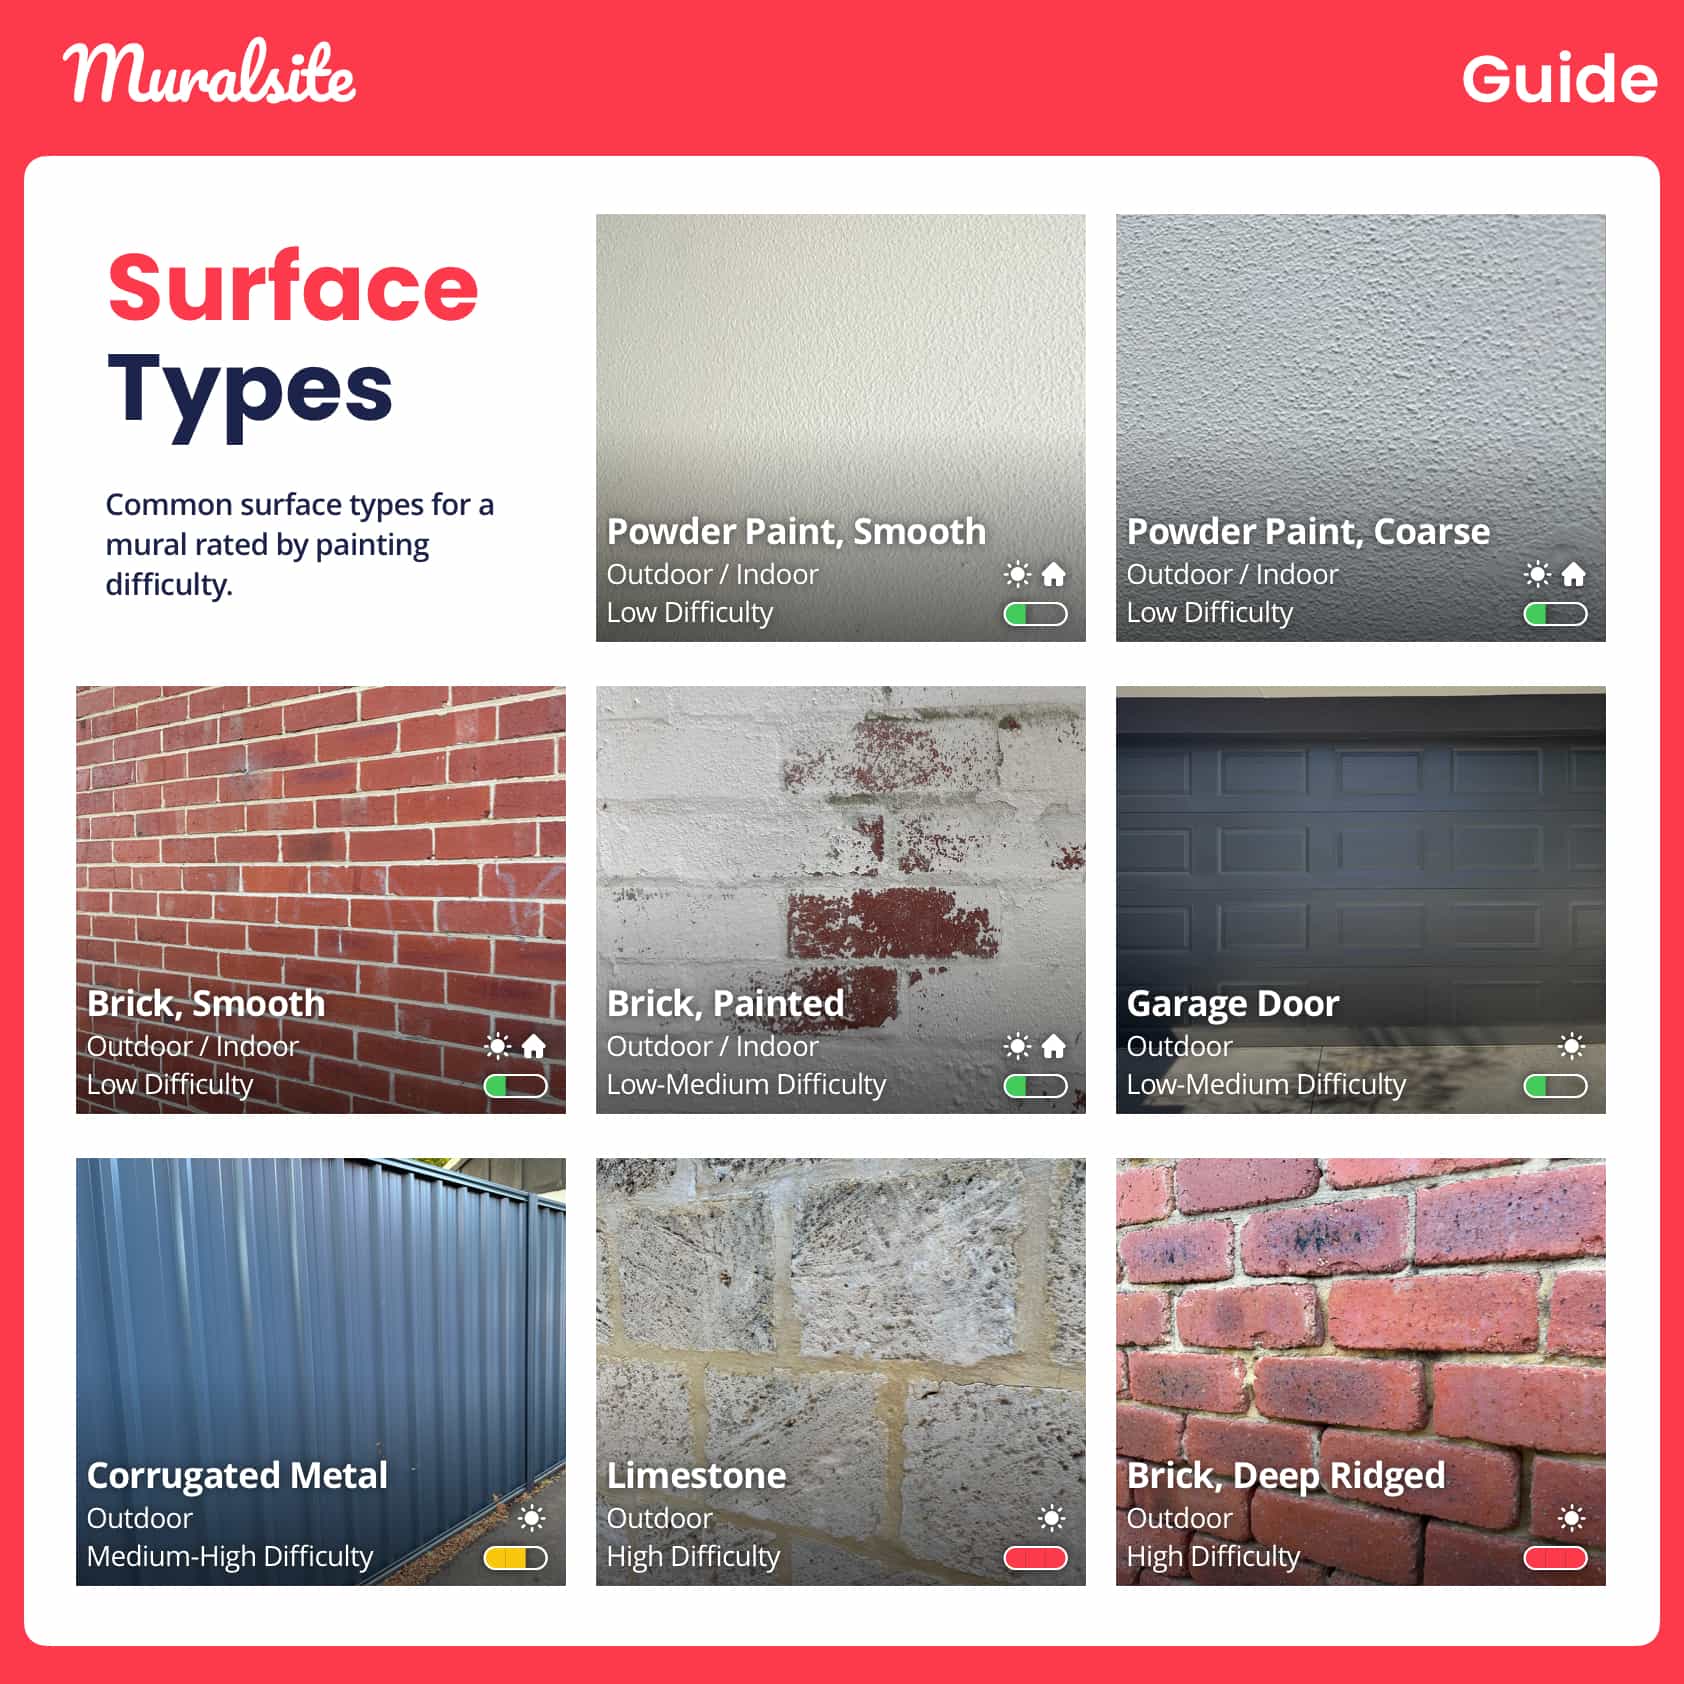 Surface Types. Common surface types for a mural rated by painting difficulty. 1. Powder Paint, Smooth: Outdoor or Indoor, Low Difficulty 2. Powder Paint, Coarse: Outdoor or Indoor, Low Difficulty 3. Brick, Painted: Outdoor or Indoor, Low-Medium Difficulty 4. Brick, Smooth: Outdoor or Indoor, Low Difficulty 5. Garage Door: Outdoor, Low-Medium Difficulty 6. Corrugated Metal: Outdoor, Medium-High Difficulty 7. Limestone: Outdoor, High Difficulty 8. Brick, Deep Ridged: Outdoor, High Difficulty